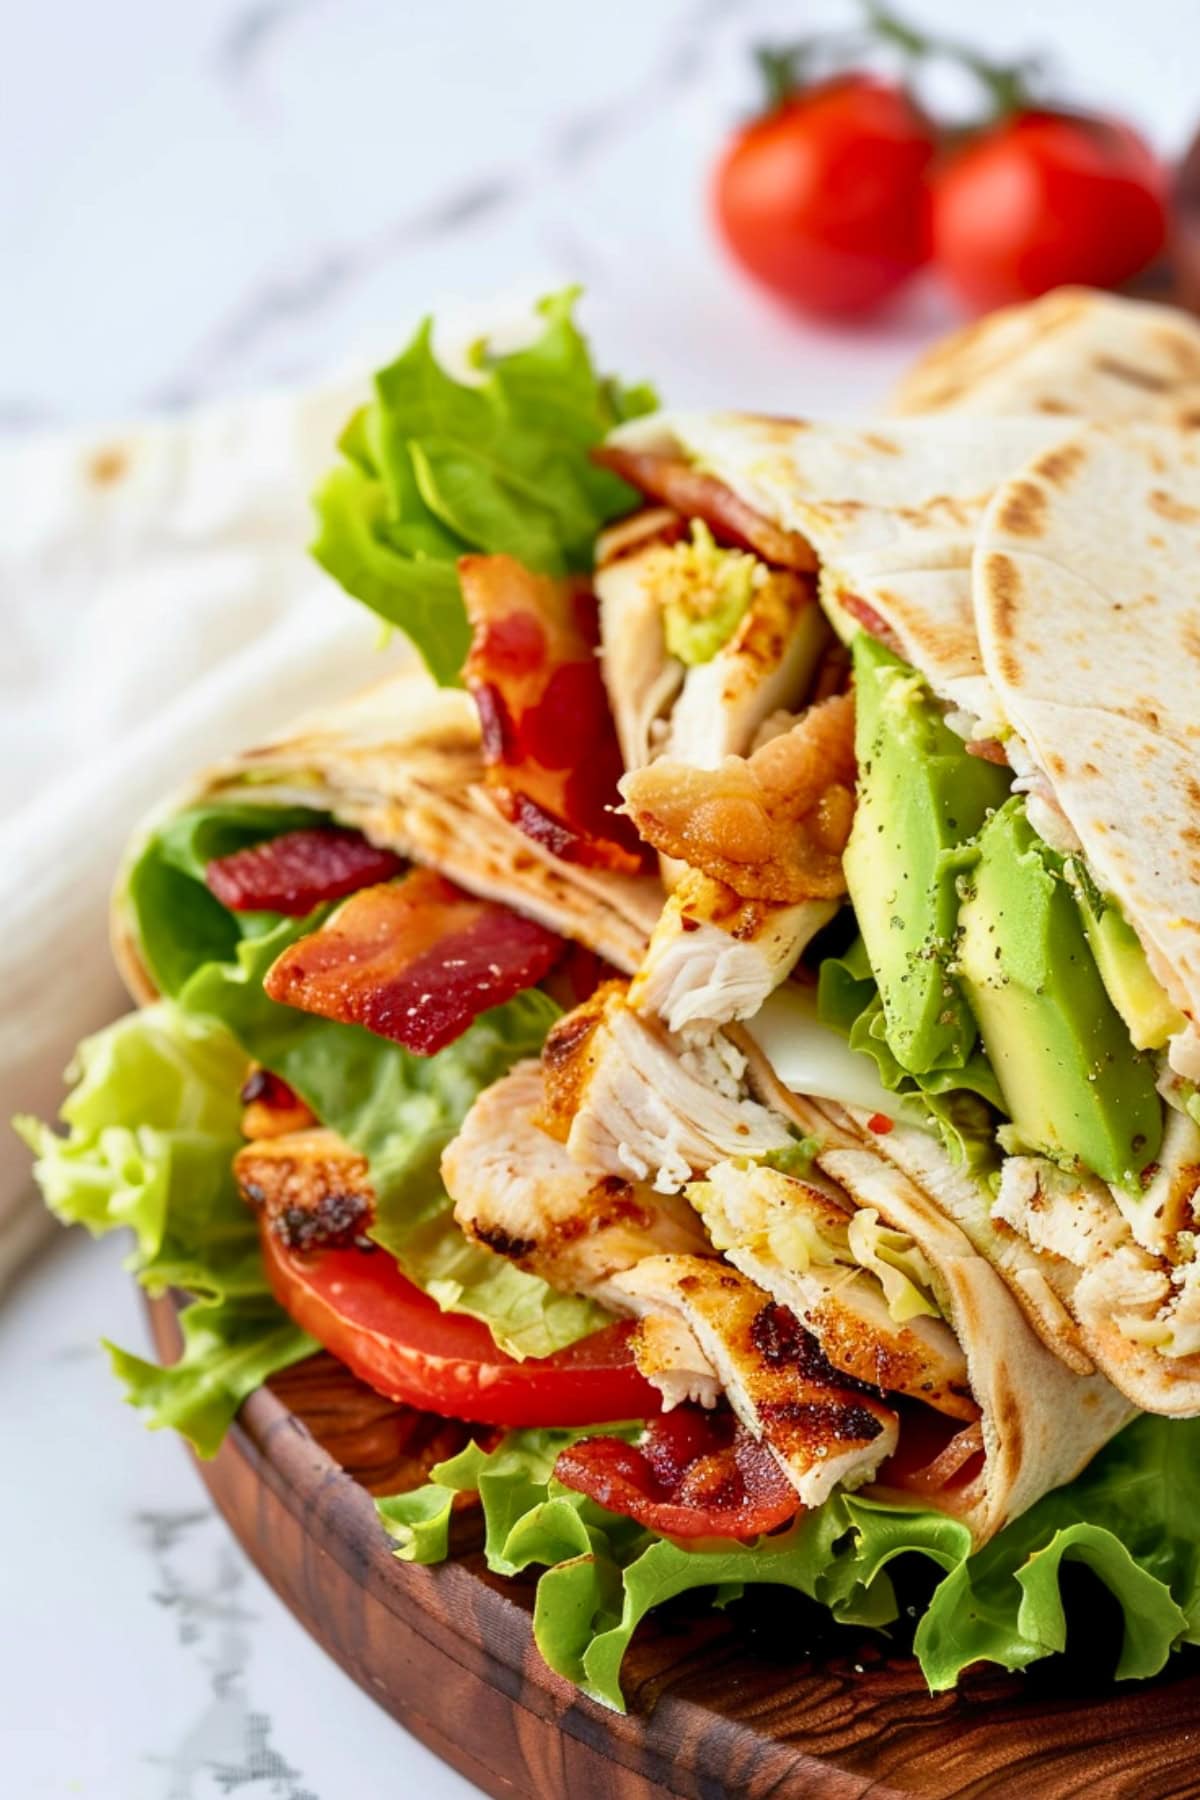 Chicken club wrap stack on each other made with thinly sliced chicken, crisp lettuce, ripe avocado, juicy tomatoes, and crispy bacon in a soft tortilla wrap.